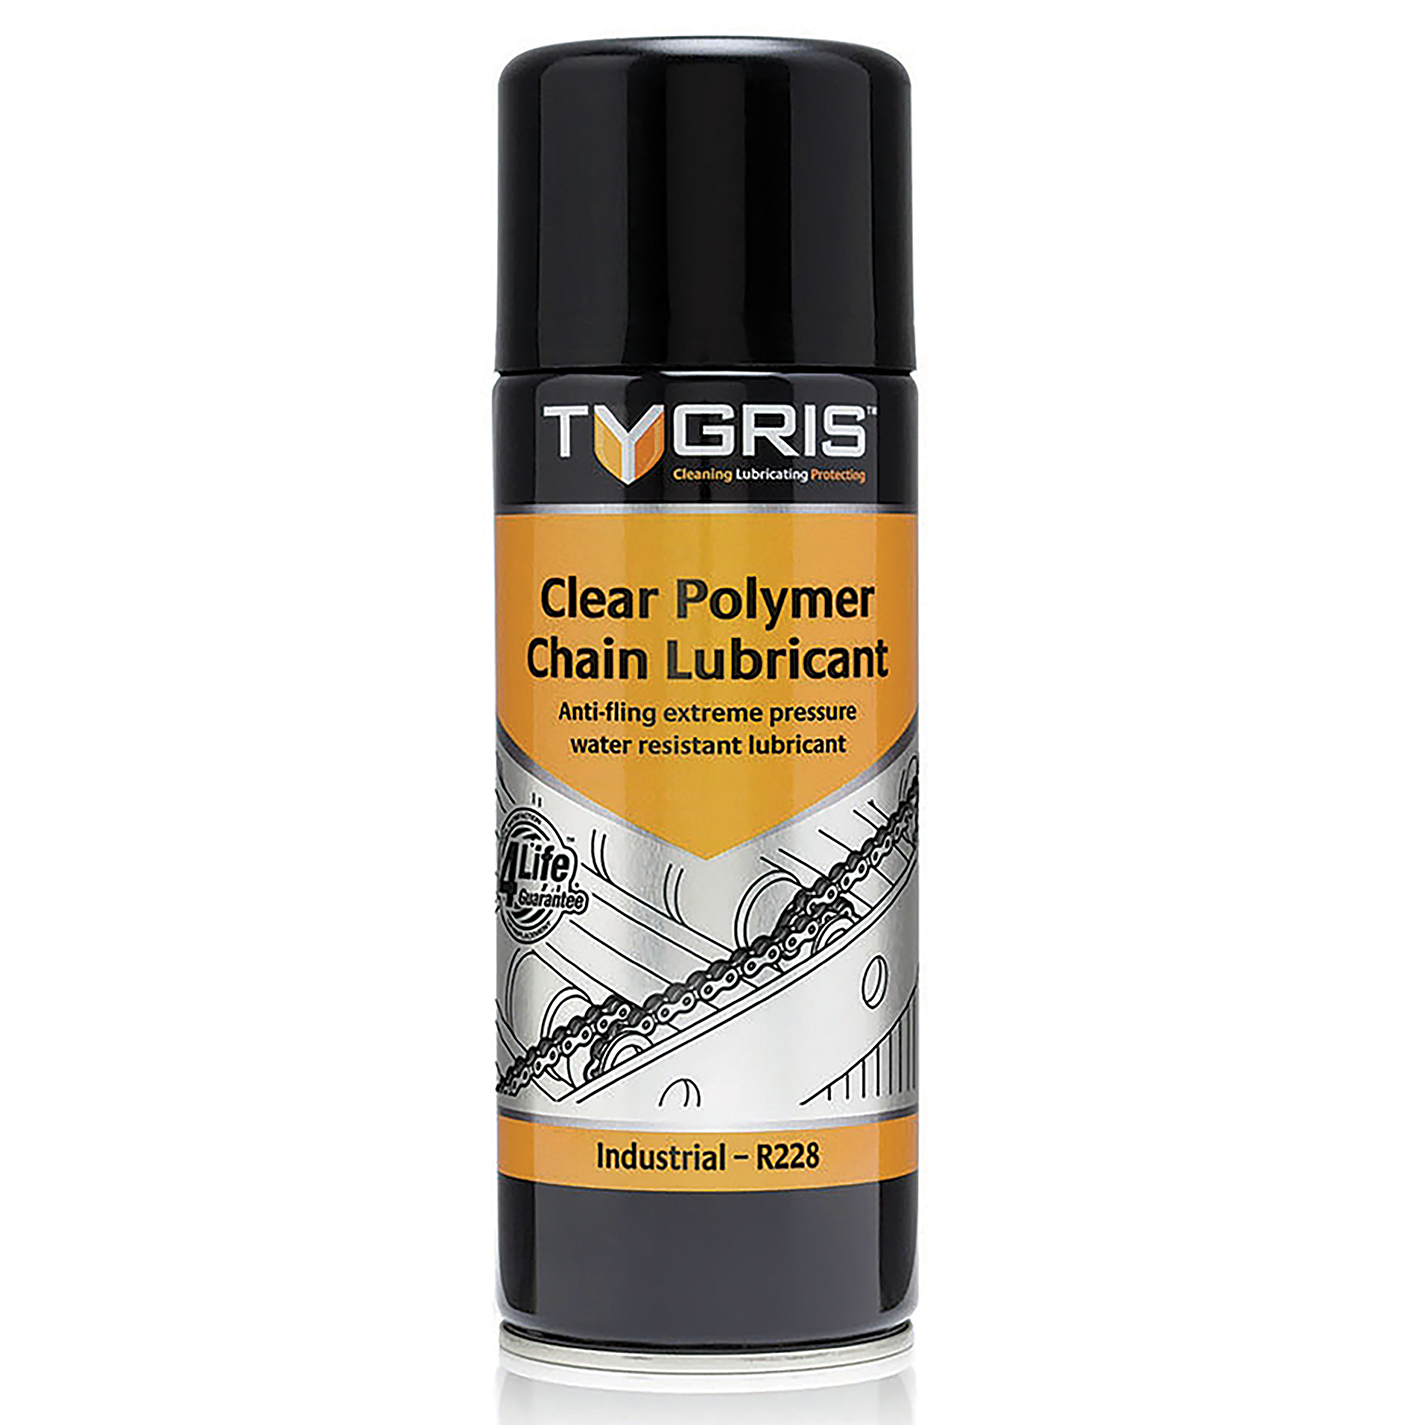 CLEAR POLYMER CHAIN LUBRICANT